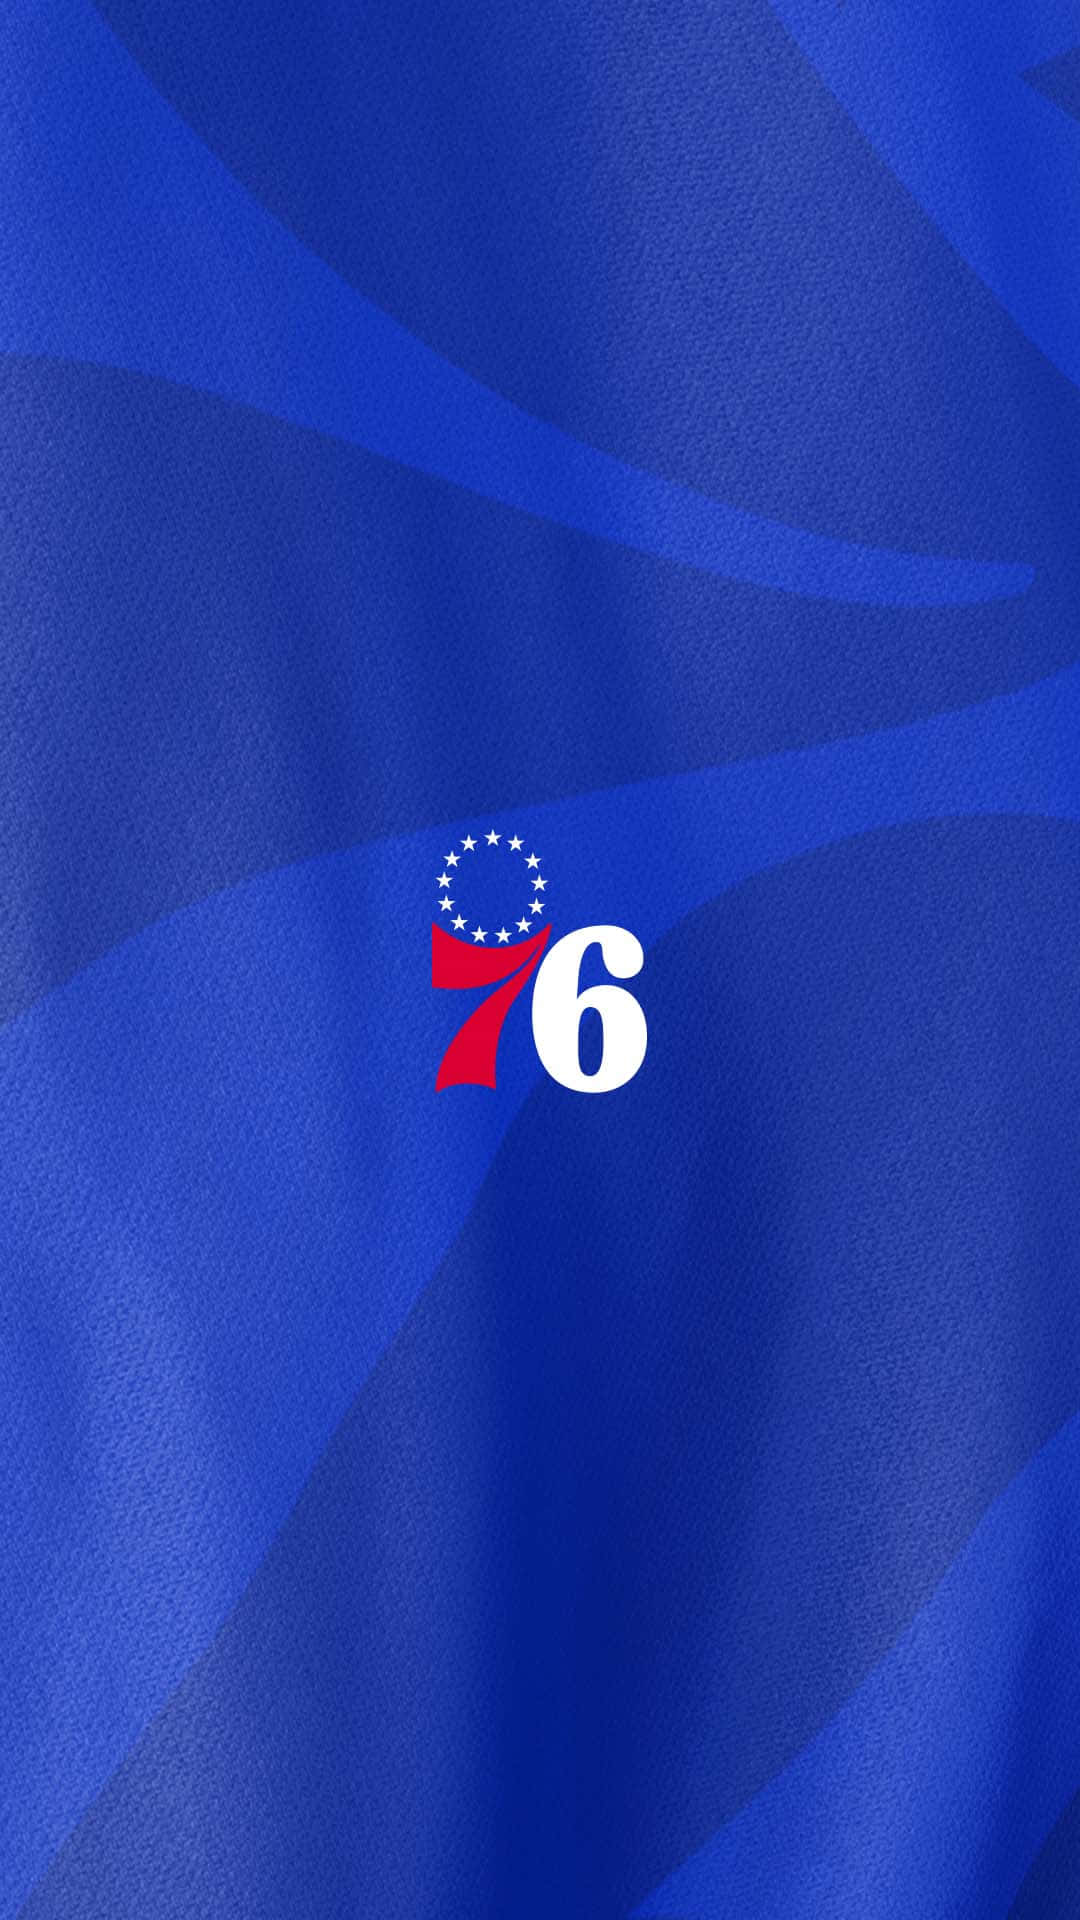 "Experience the court action with the Sixers Iphone" Wallpaper